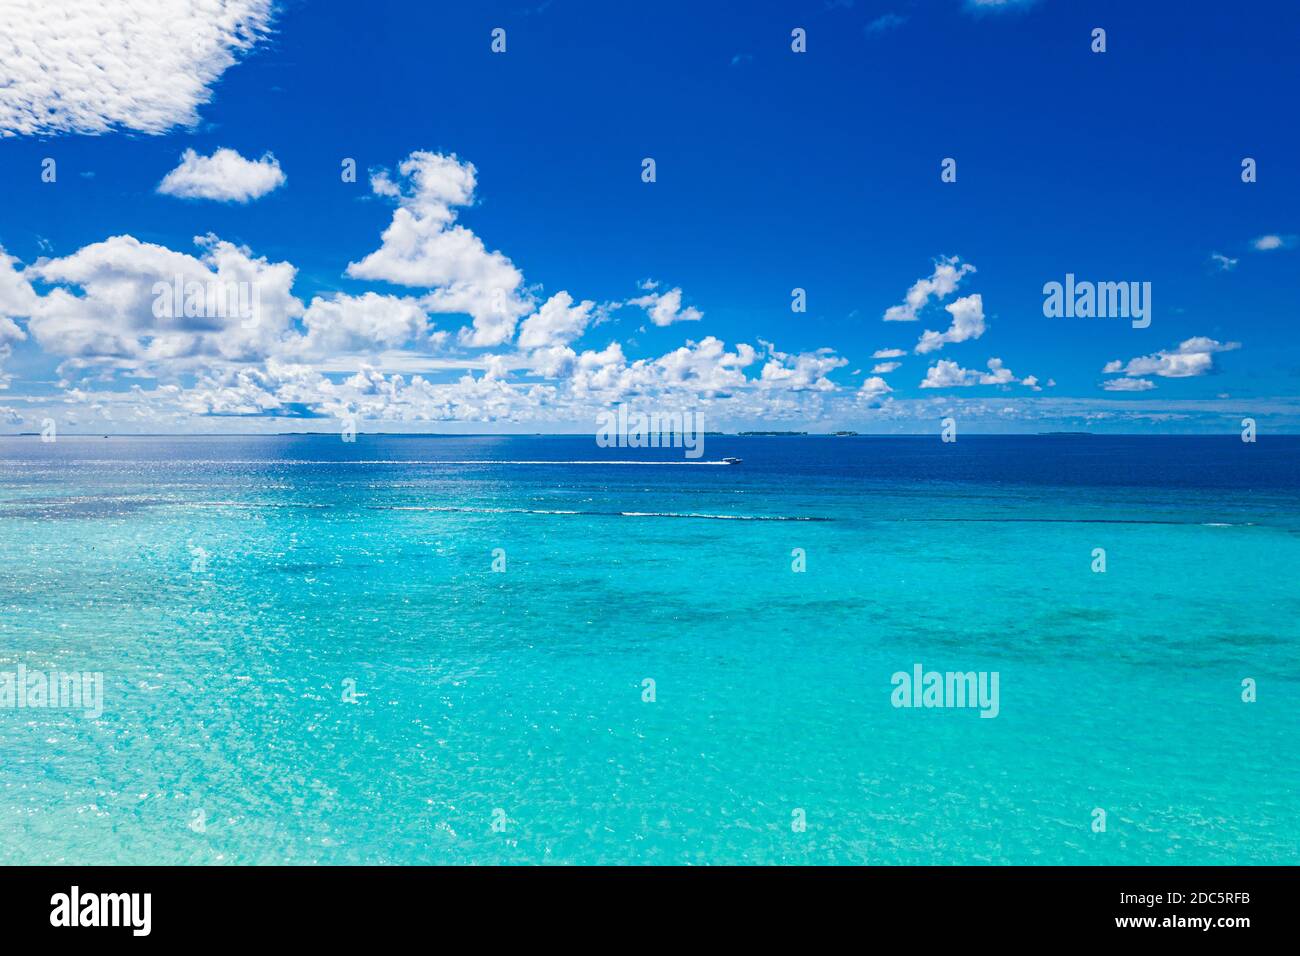 Amazing seascape, beautiful turquoise tropical ocean water with boat on it top view aerial photo. Maldives Indian ocean, aerial seascape, landscape Stock Photo